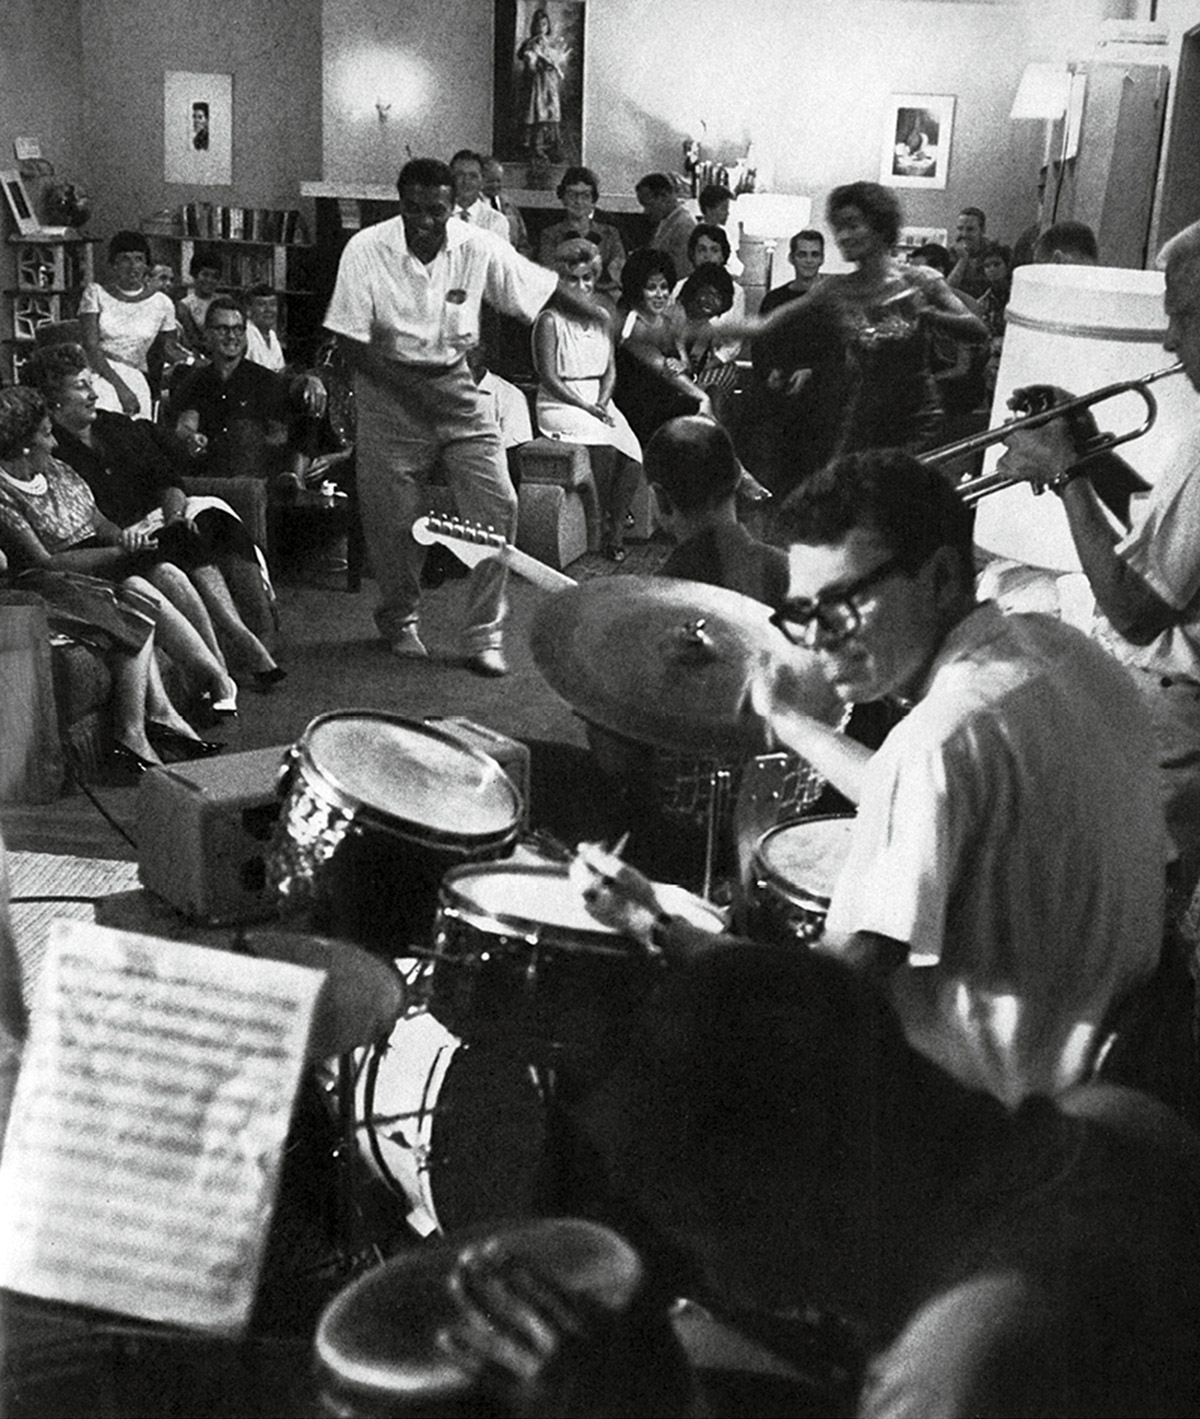 A nineteen sixty-two photograph of Synanon’s house band playing for members and guests. Over the years, the group included numerous celebrated musicians, including guitarist Joe Pass.